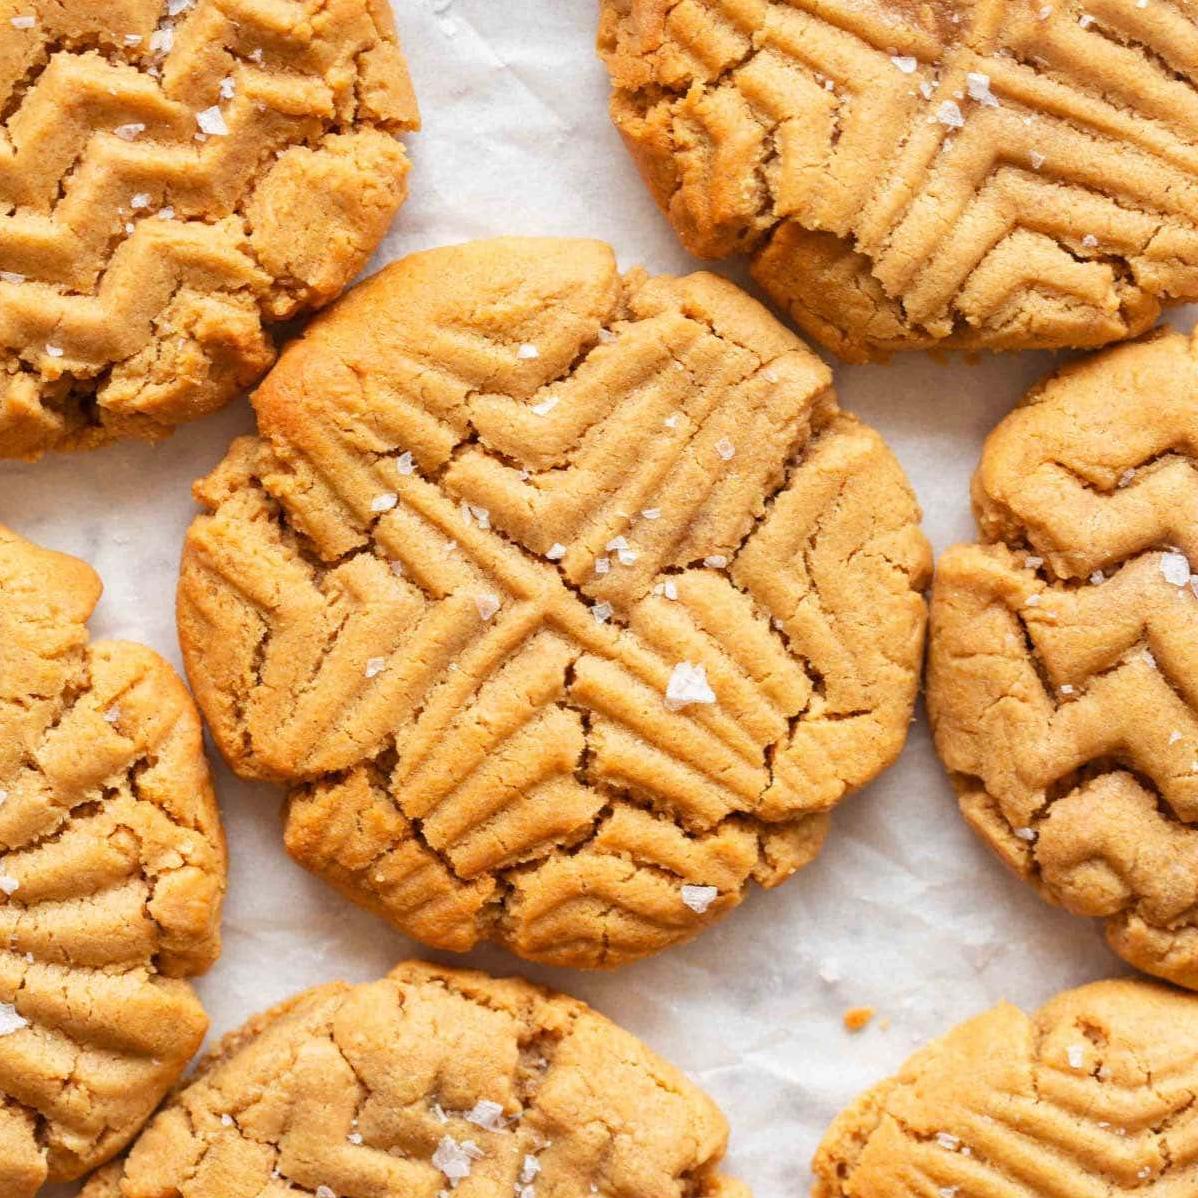  If you're a fan of classic peanut butter cookies, then prepare to be